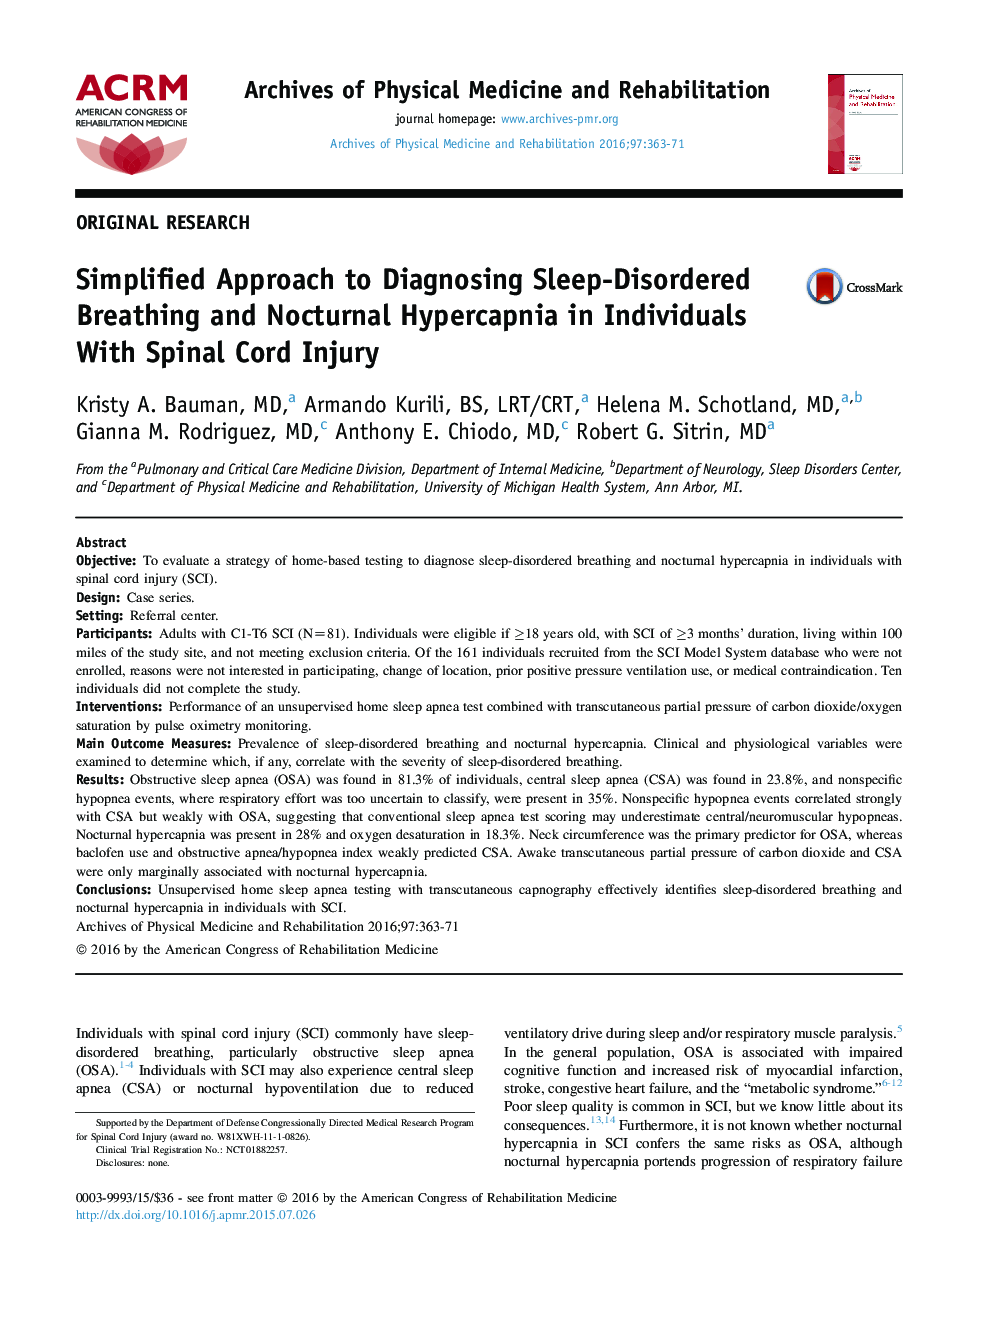 Simplified Approach to Diagnosing Sleep-Disordered Breathing and Nocturnal Hypercapnia in Individuals With Spinal Cord Injury 